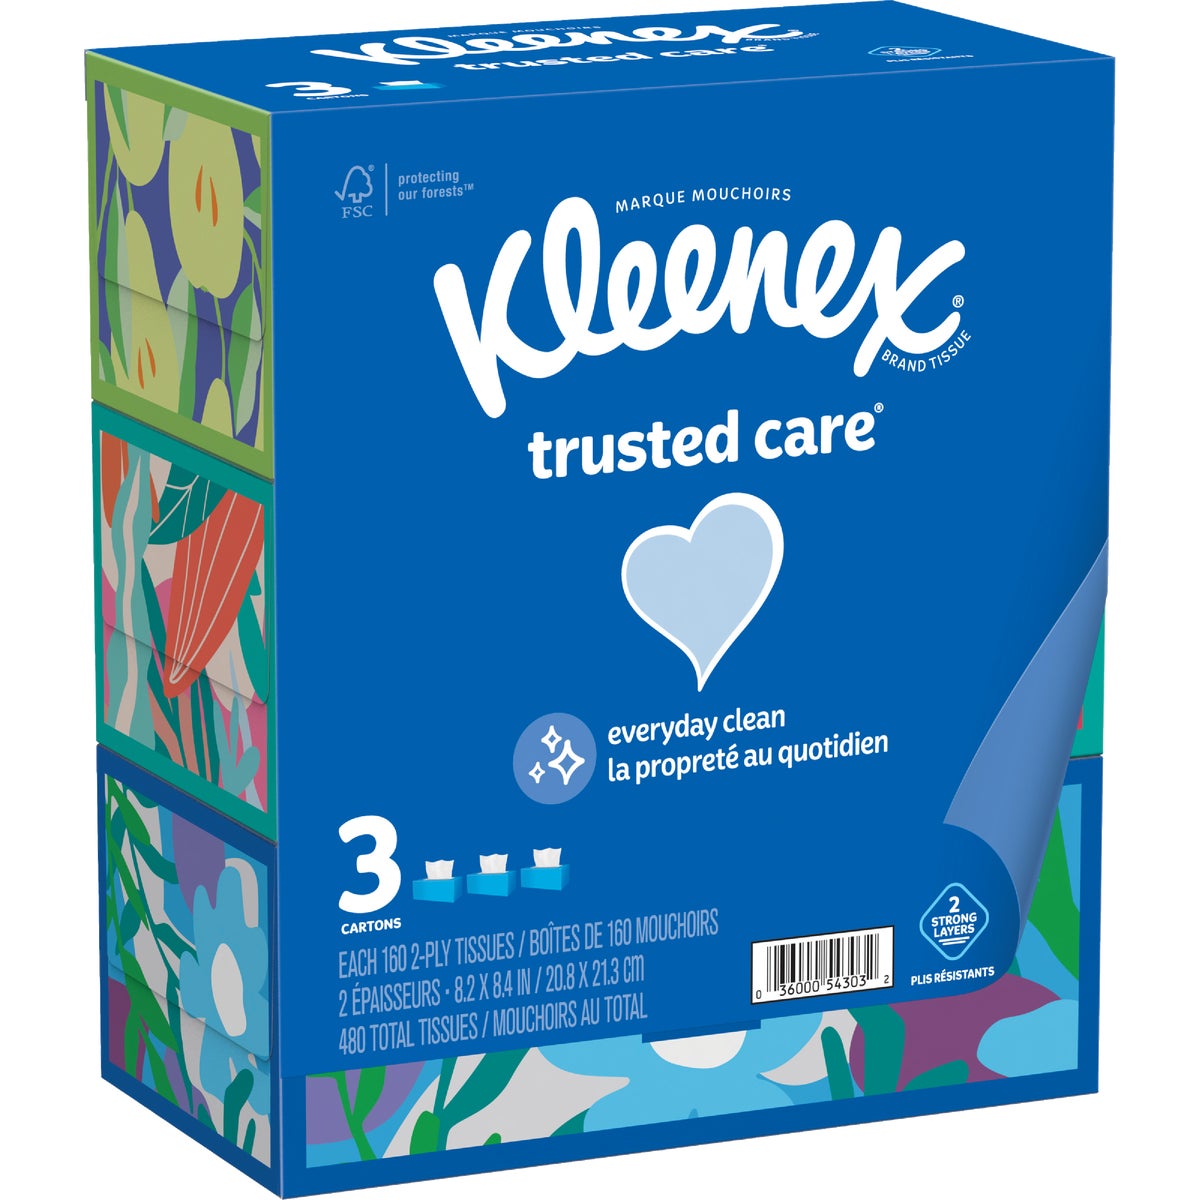 Kleenex Trusted Care 160 Count 2-Ply White Facial Tissue (3-Pack)